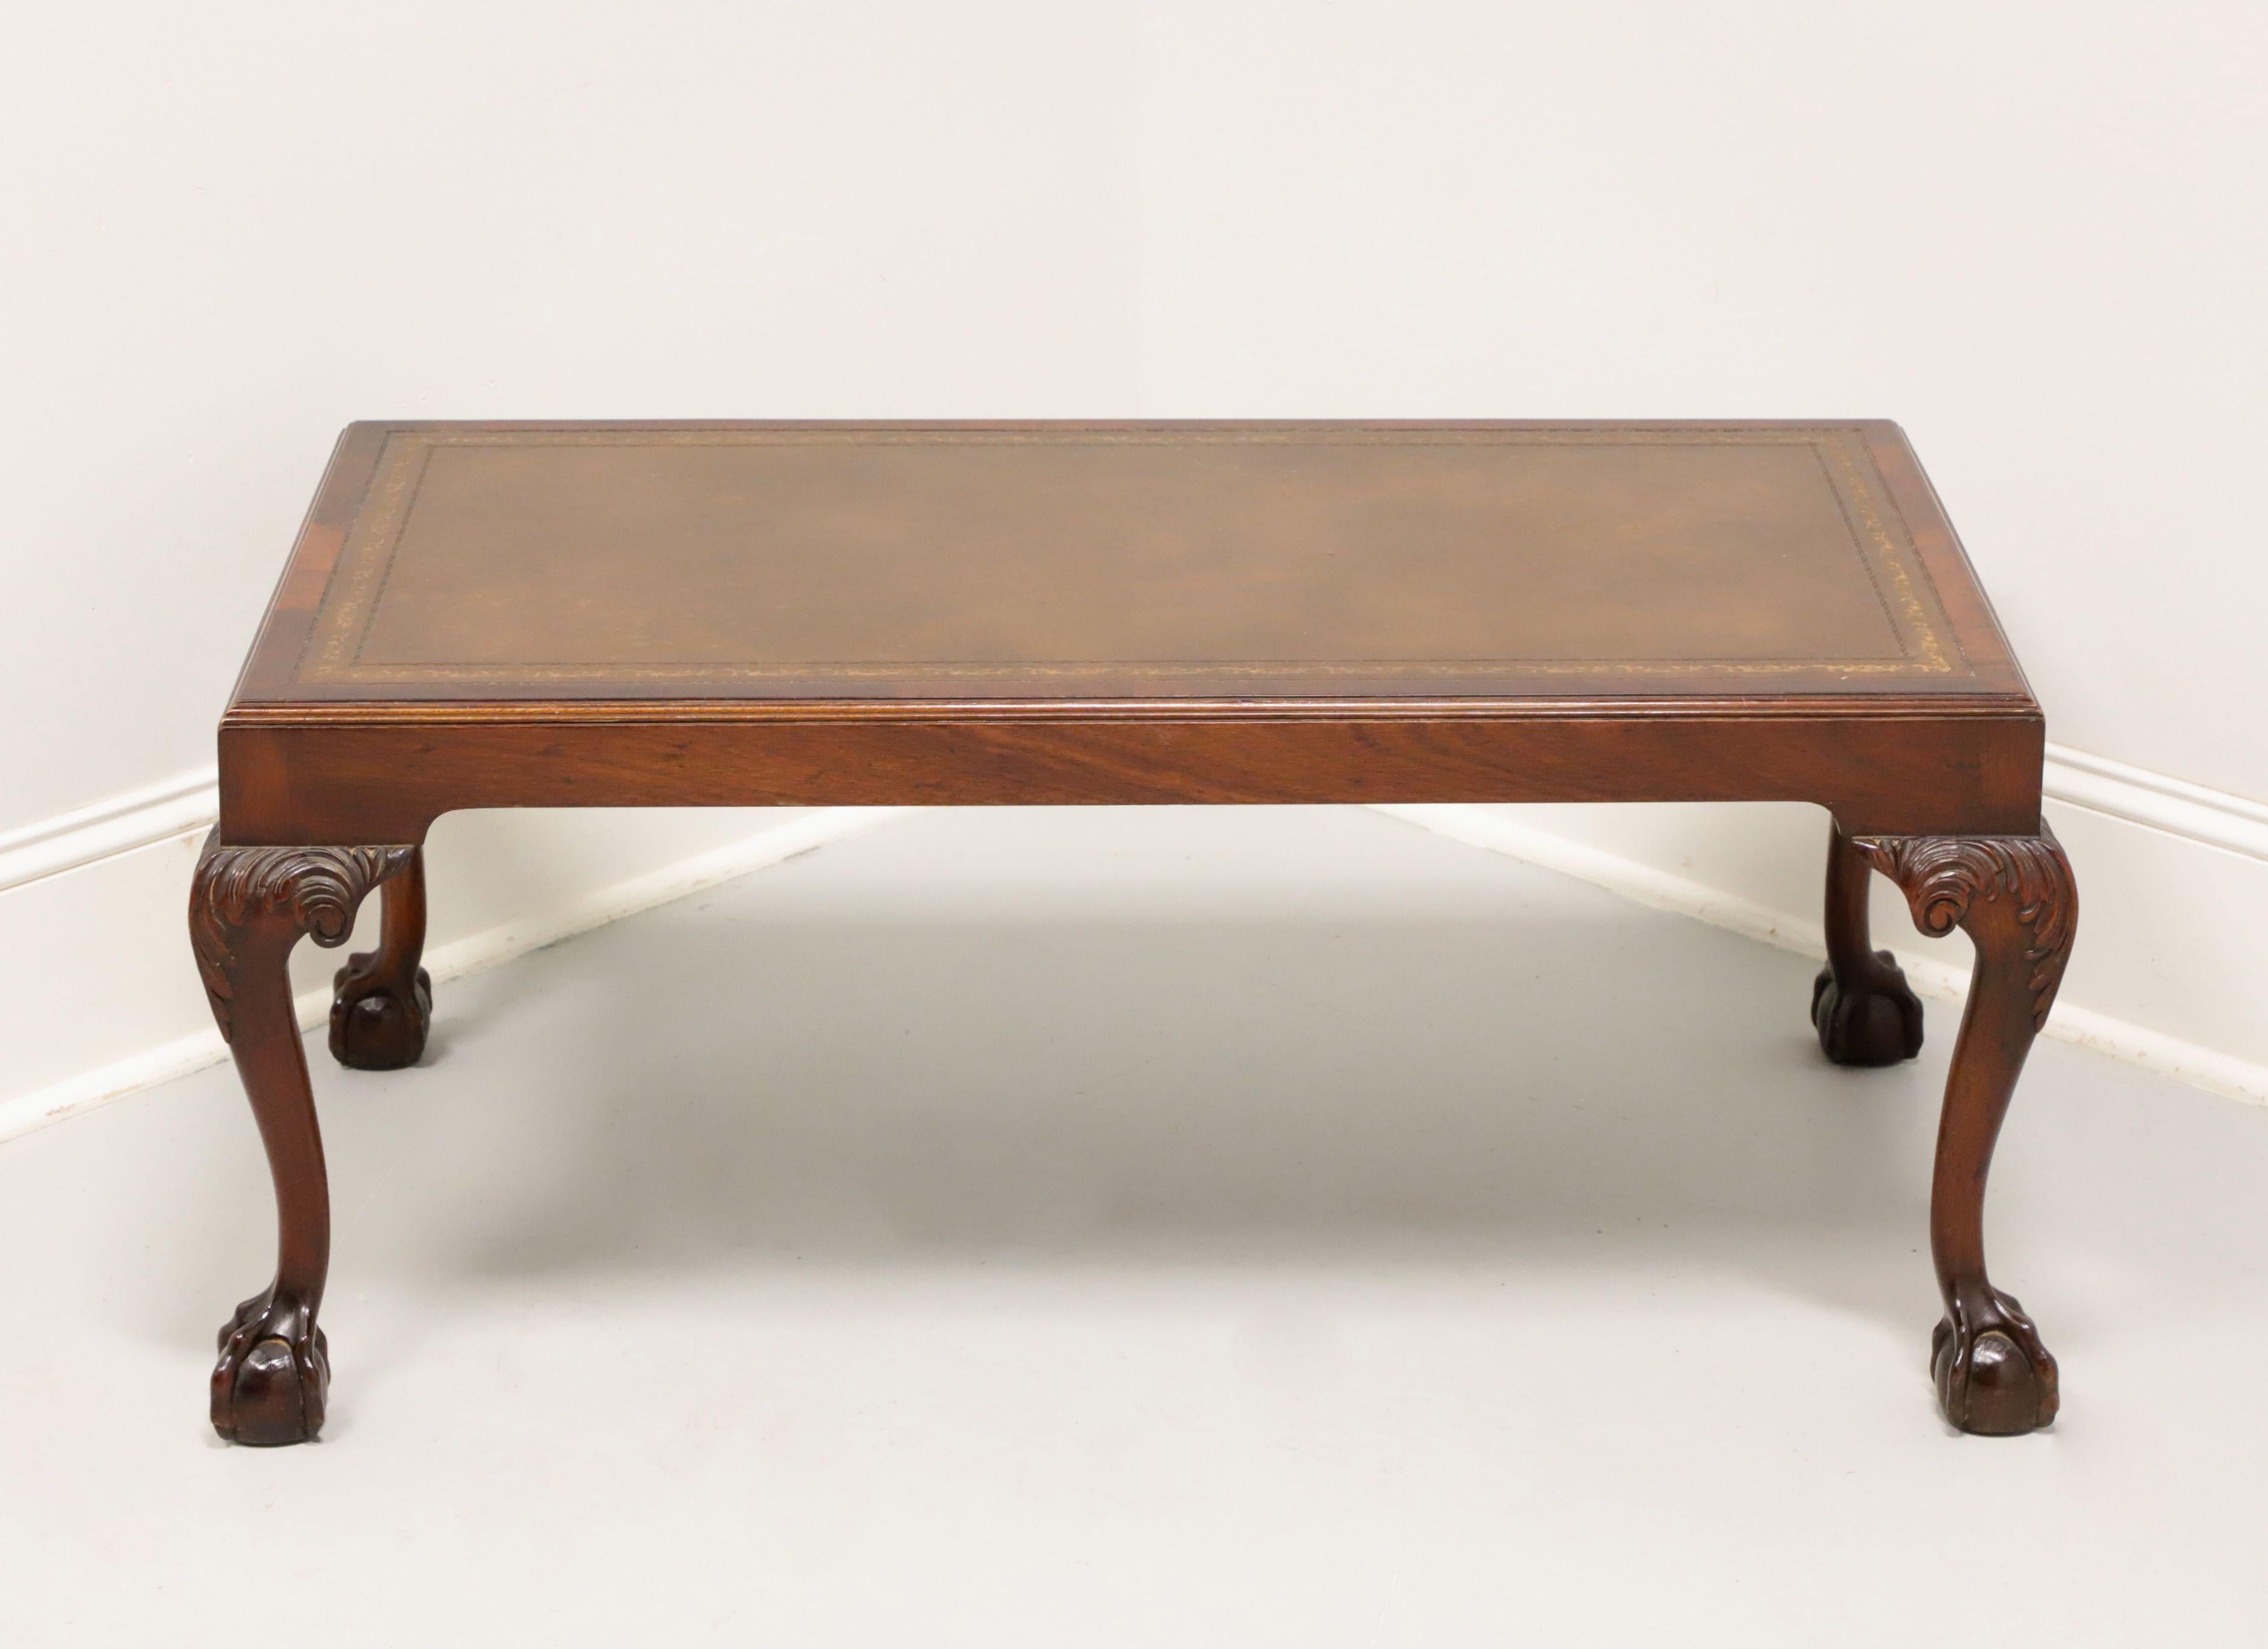 A rectangular shaped coffee table in the Chippendale style by Barnard & Simonds. Mahogany with embossed leather ogee edge top, smooth apron, acanthus leaf carved to knees, cabriole legs, and ball in claw feet. Made in Grand Rapids, Michigan, USA, in